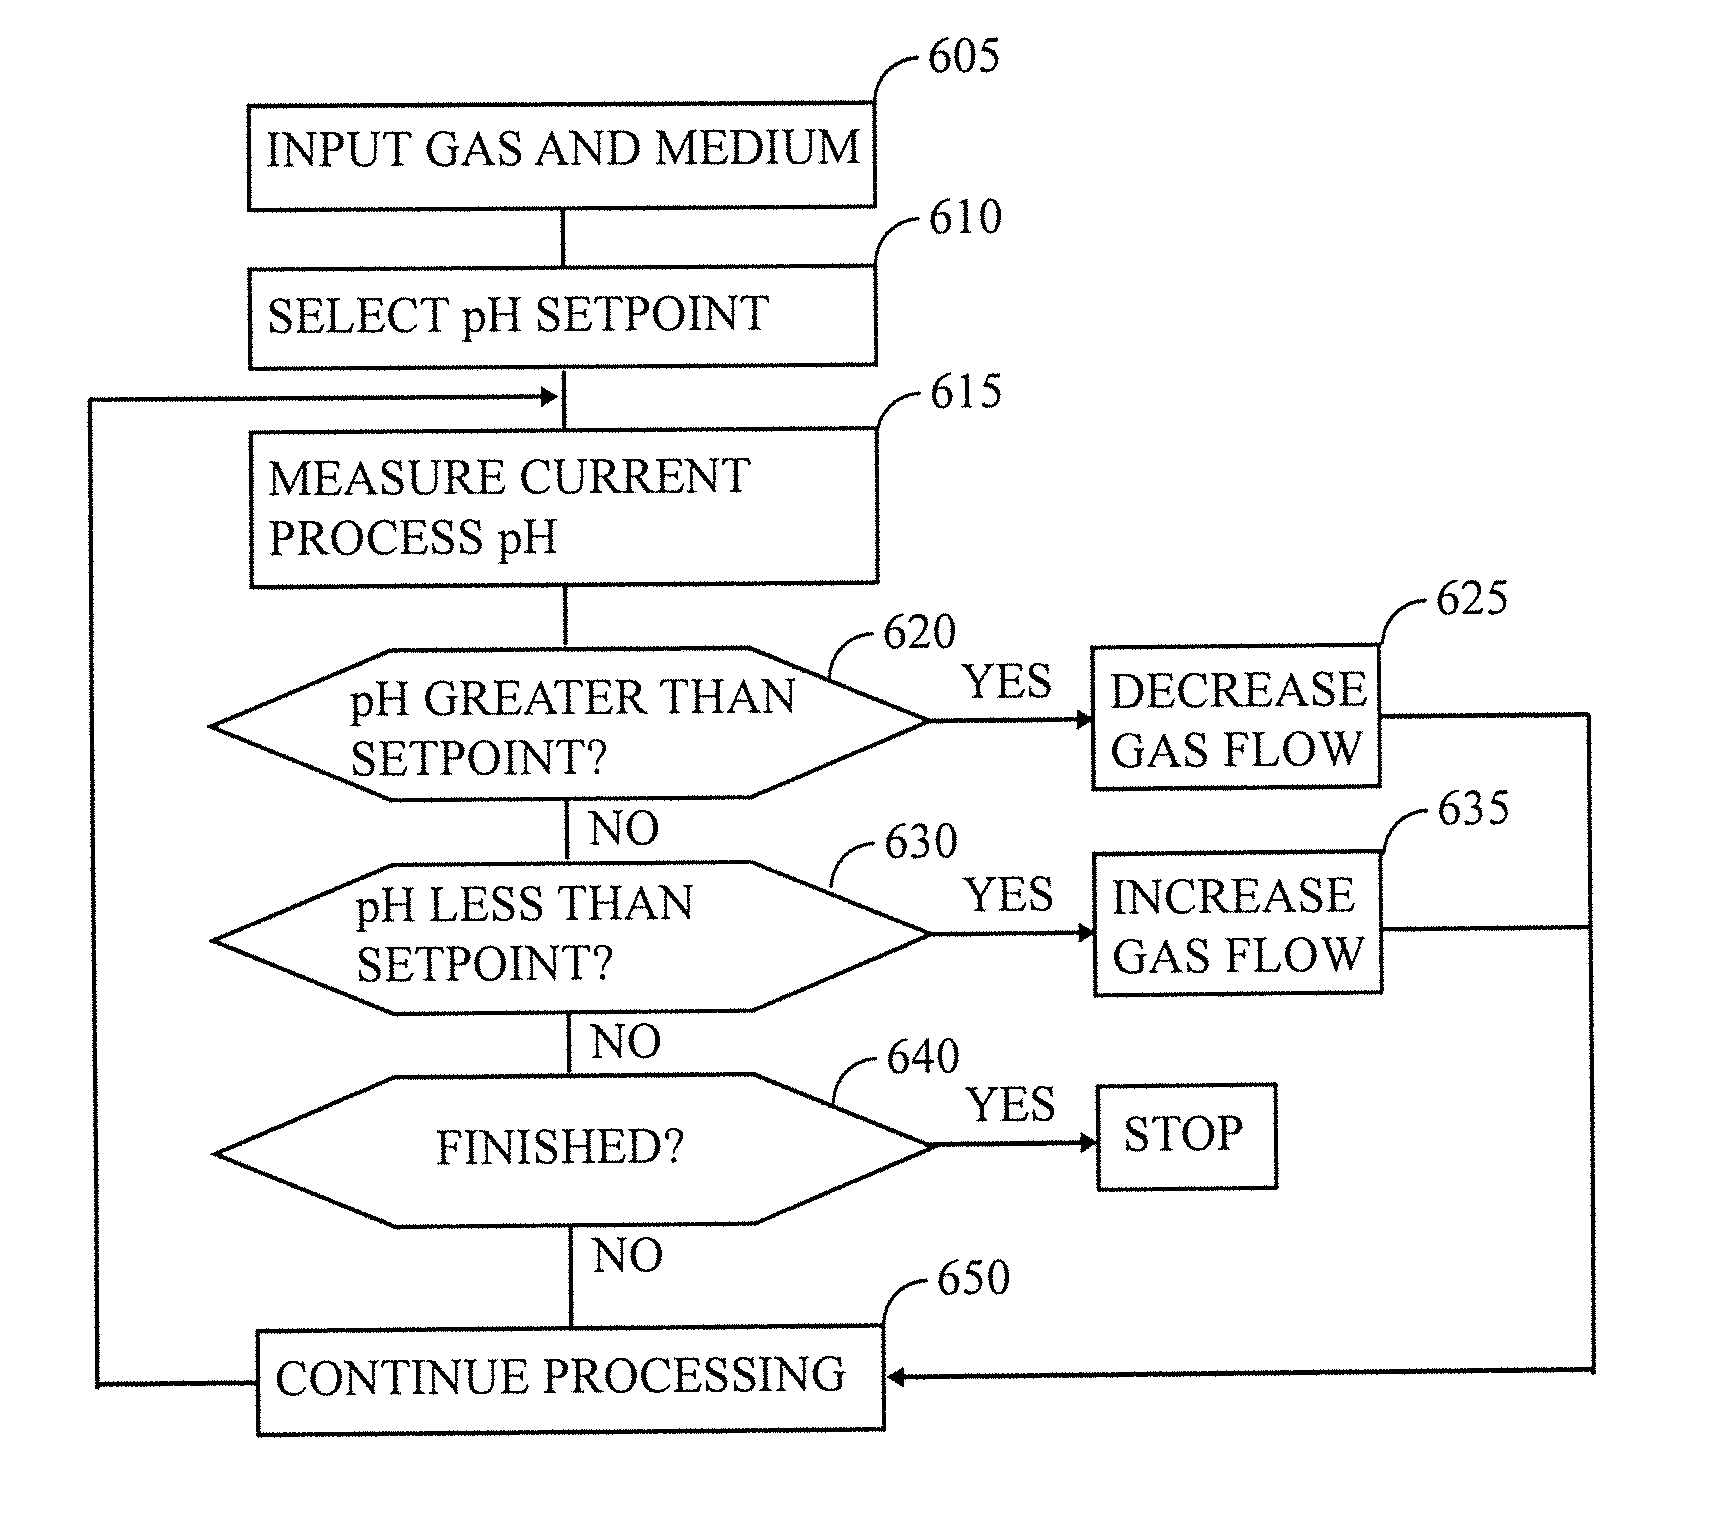 SYSTEM AND METHOD FOR FEEDBACK CONTROL OF GAS SUPPLY FOR ETHANOL PRODUCTION VIA SYNGAS FERMENTATION USING pH AS A KEY CONTROL INDICATOR